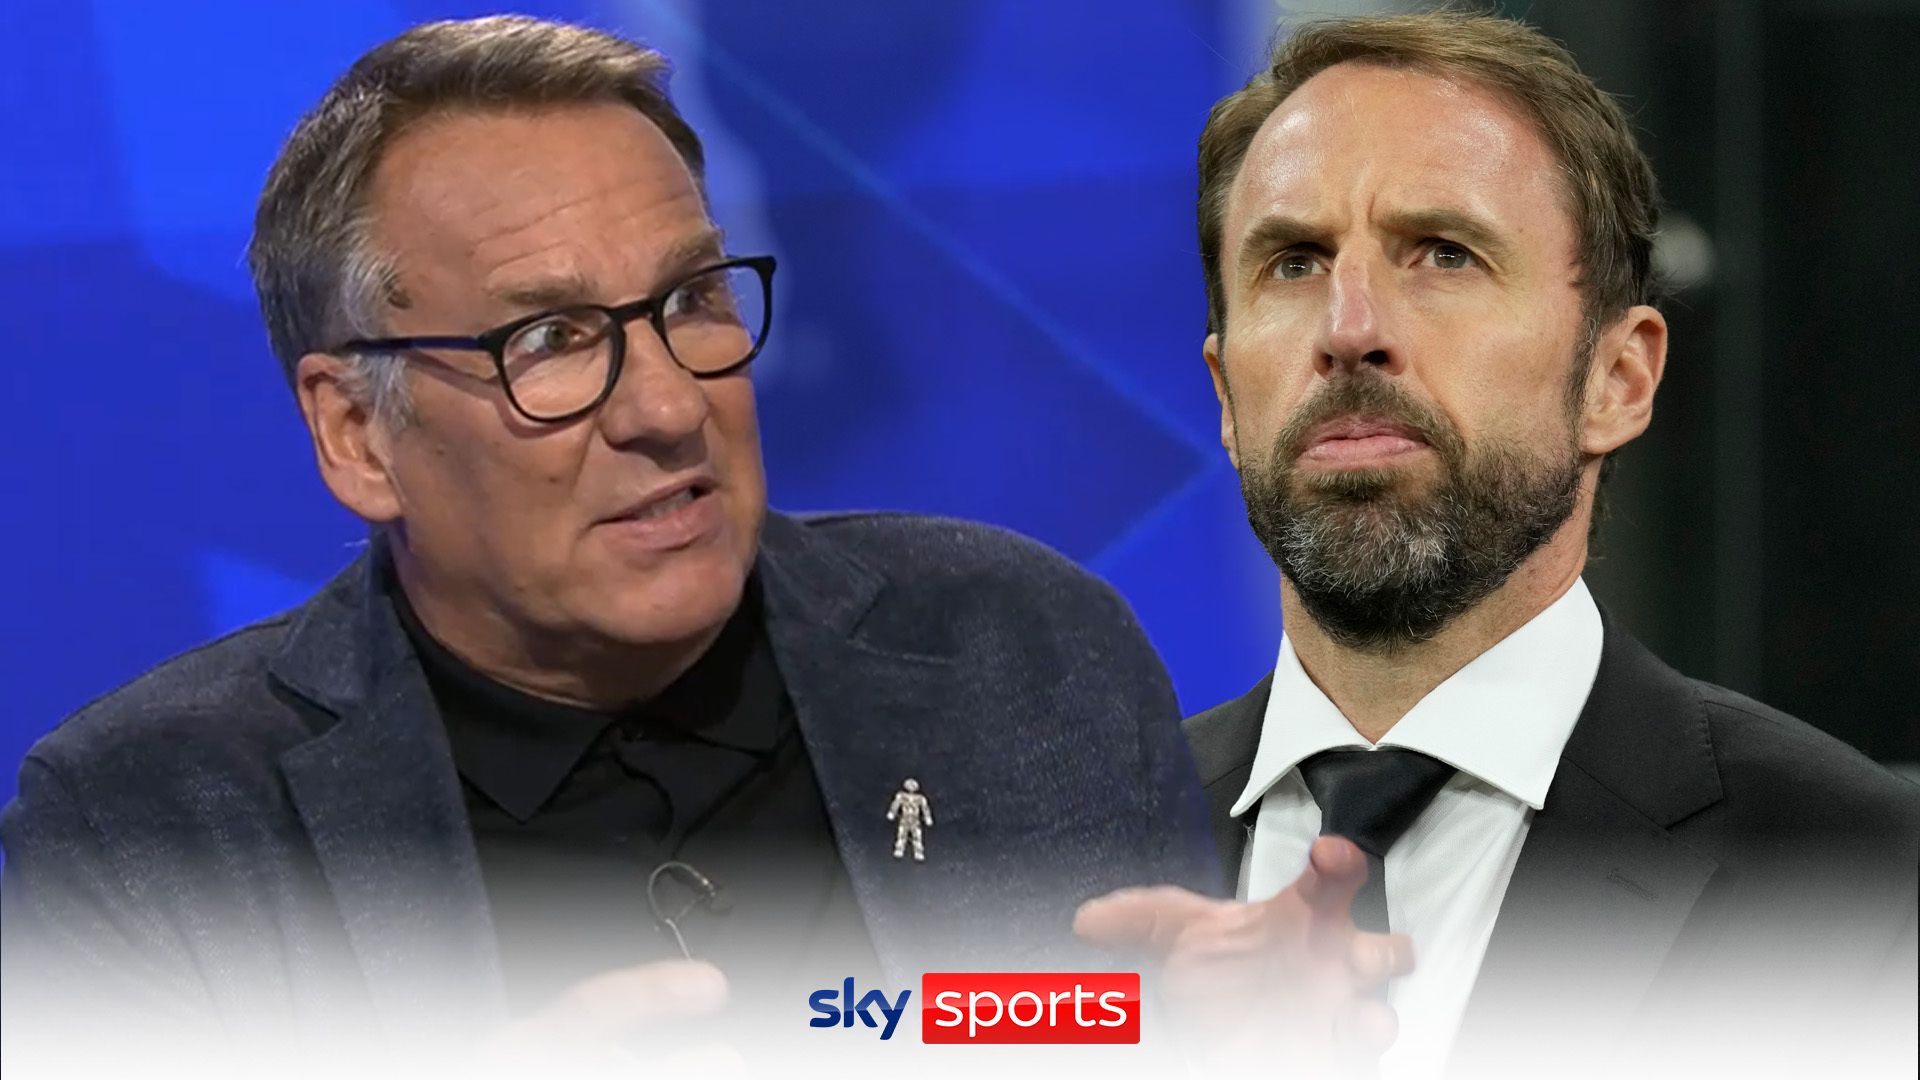 Merson says: England have big Euros chance | 'Saka can go as far as he wants'